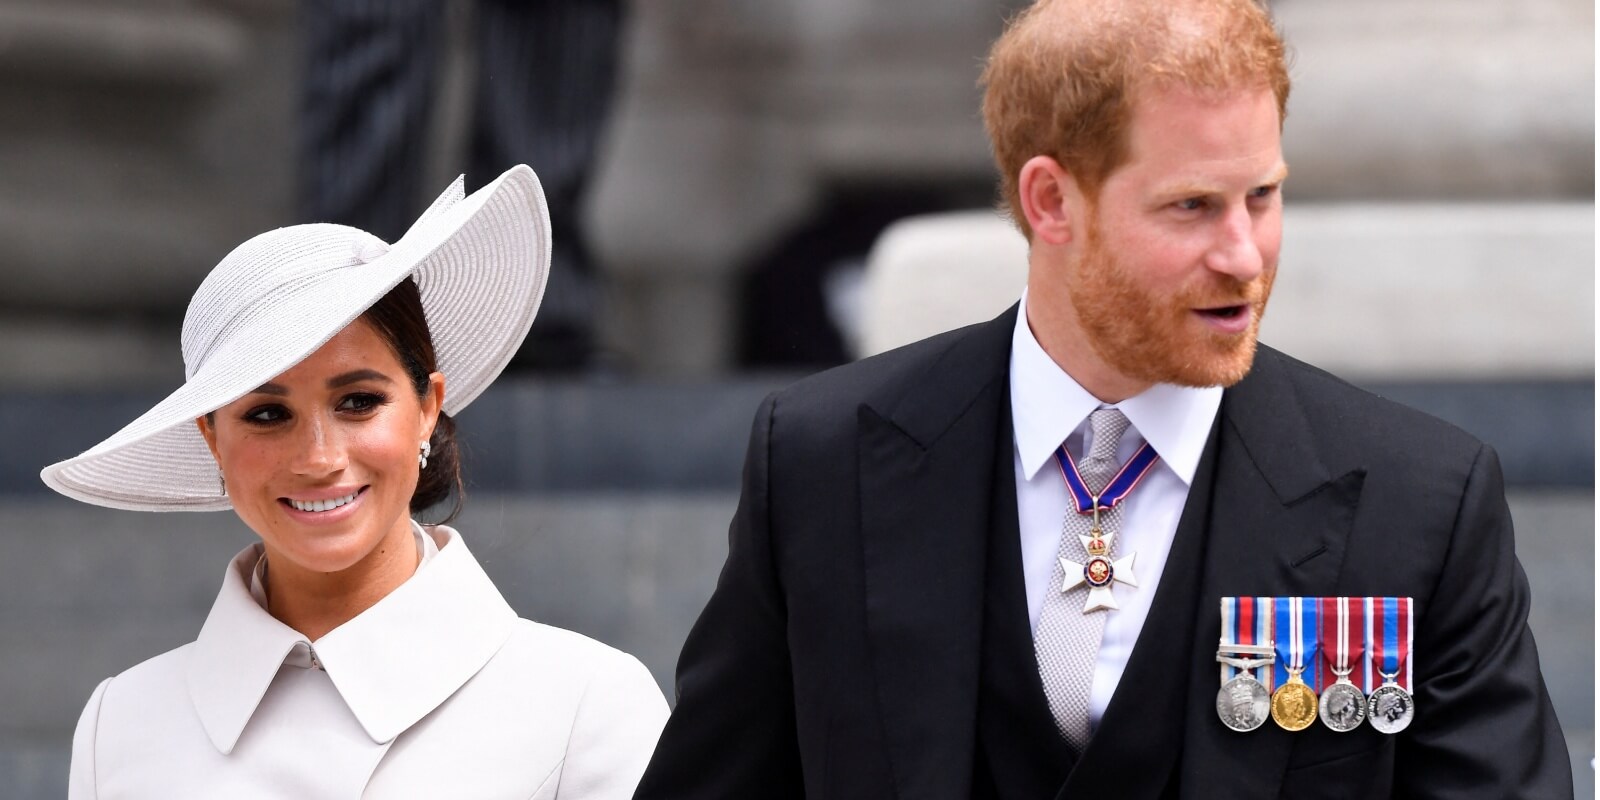 Meghan Markle and Prince Harry hold hands during the National Service of Thanksgiving at St Paul's Cathedral during the Queen's Platinum Jubilee celebrations on June 3, 2022 in London, England.